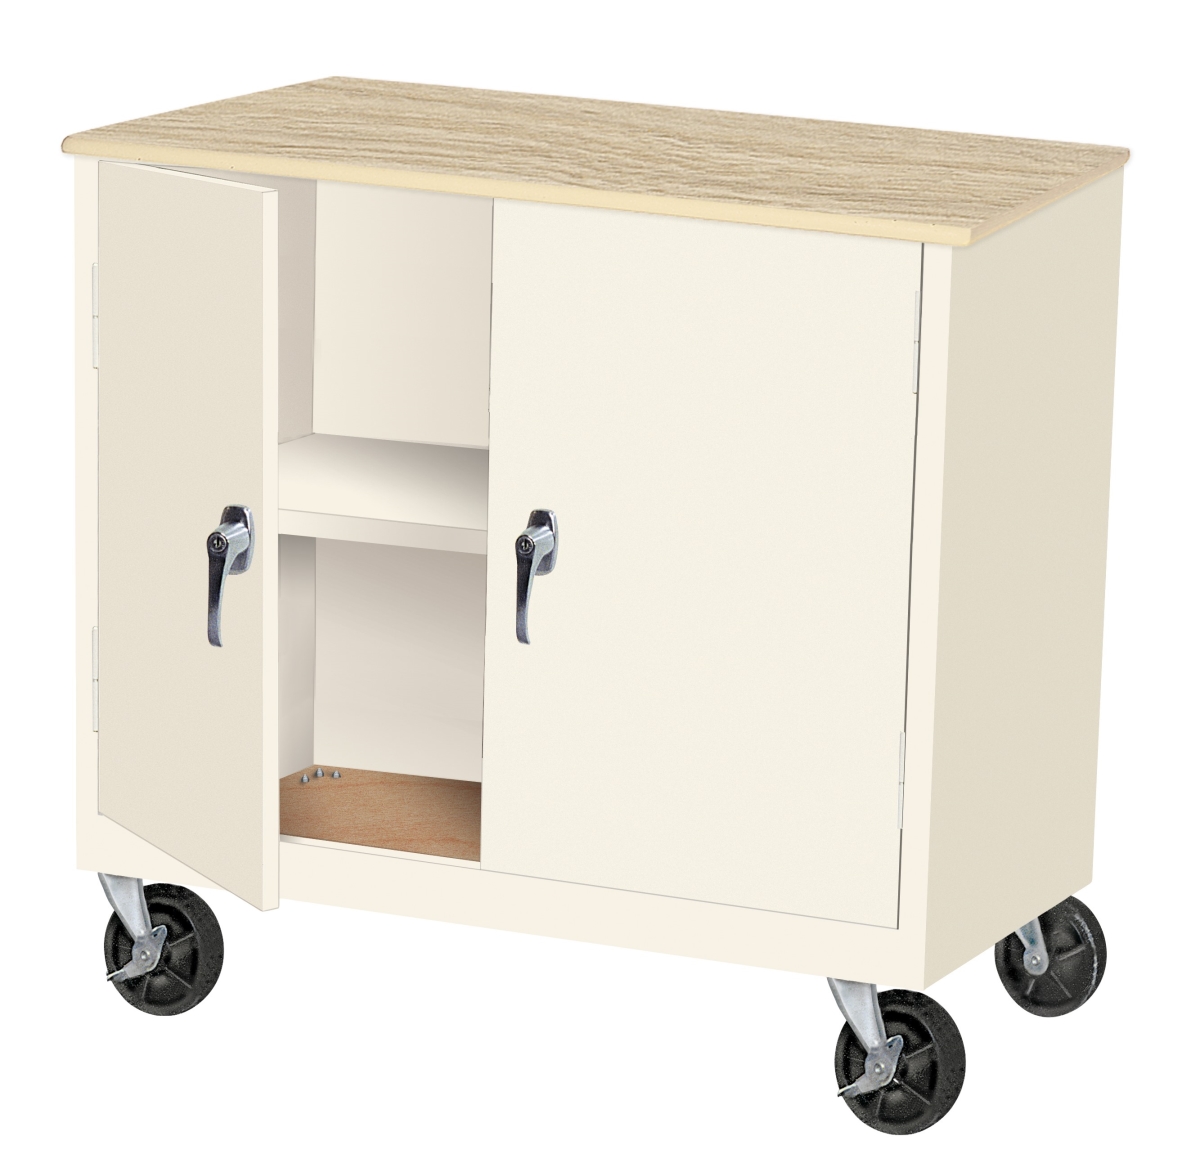 Mobile Cabinets - Navy Blue, 36 X 24 X 66 In.